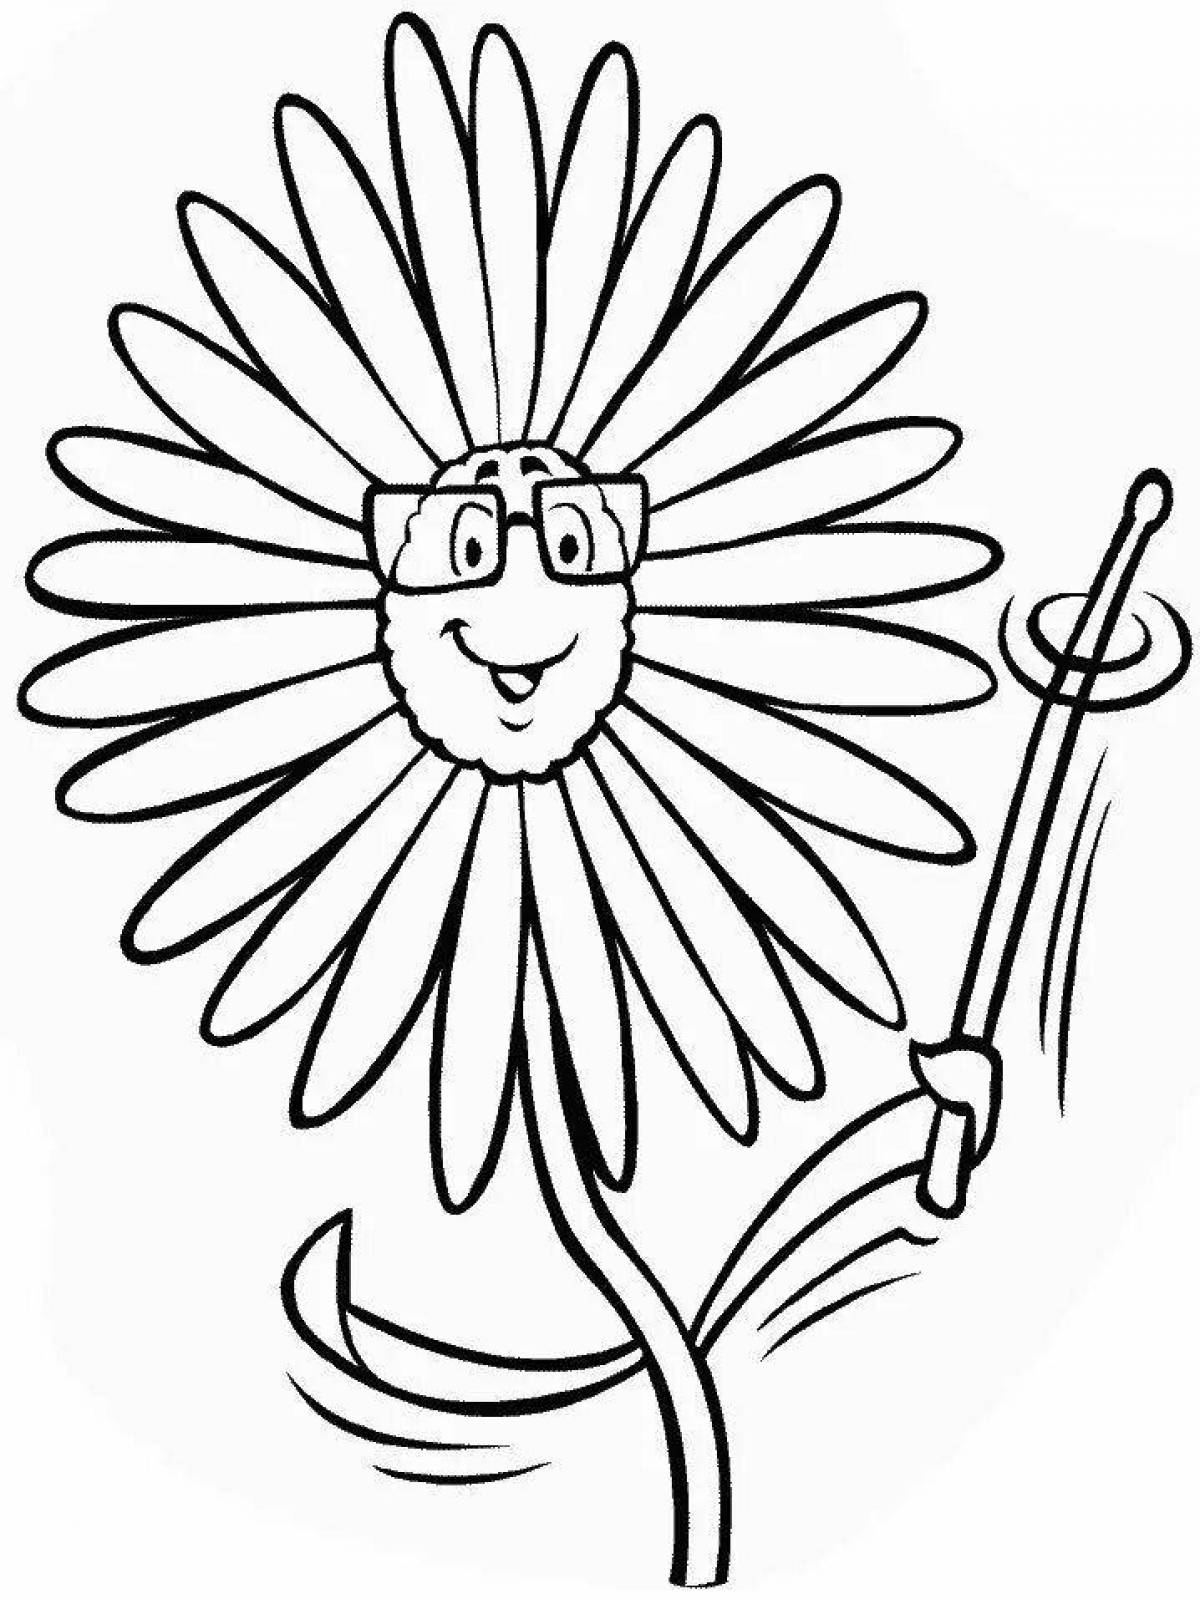 Coloring page exuberant chamomile flower